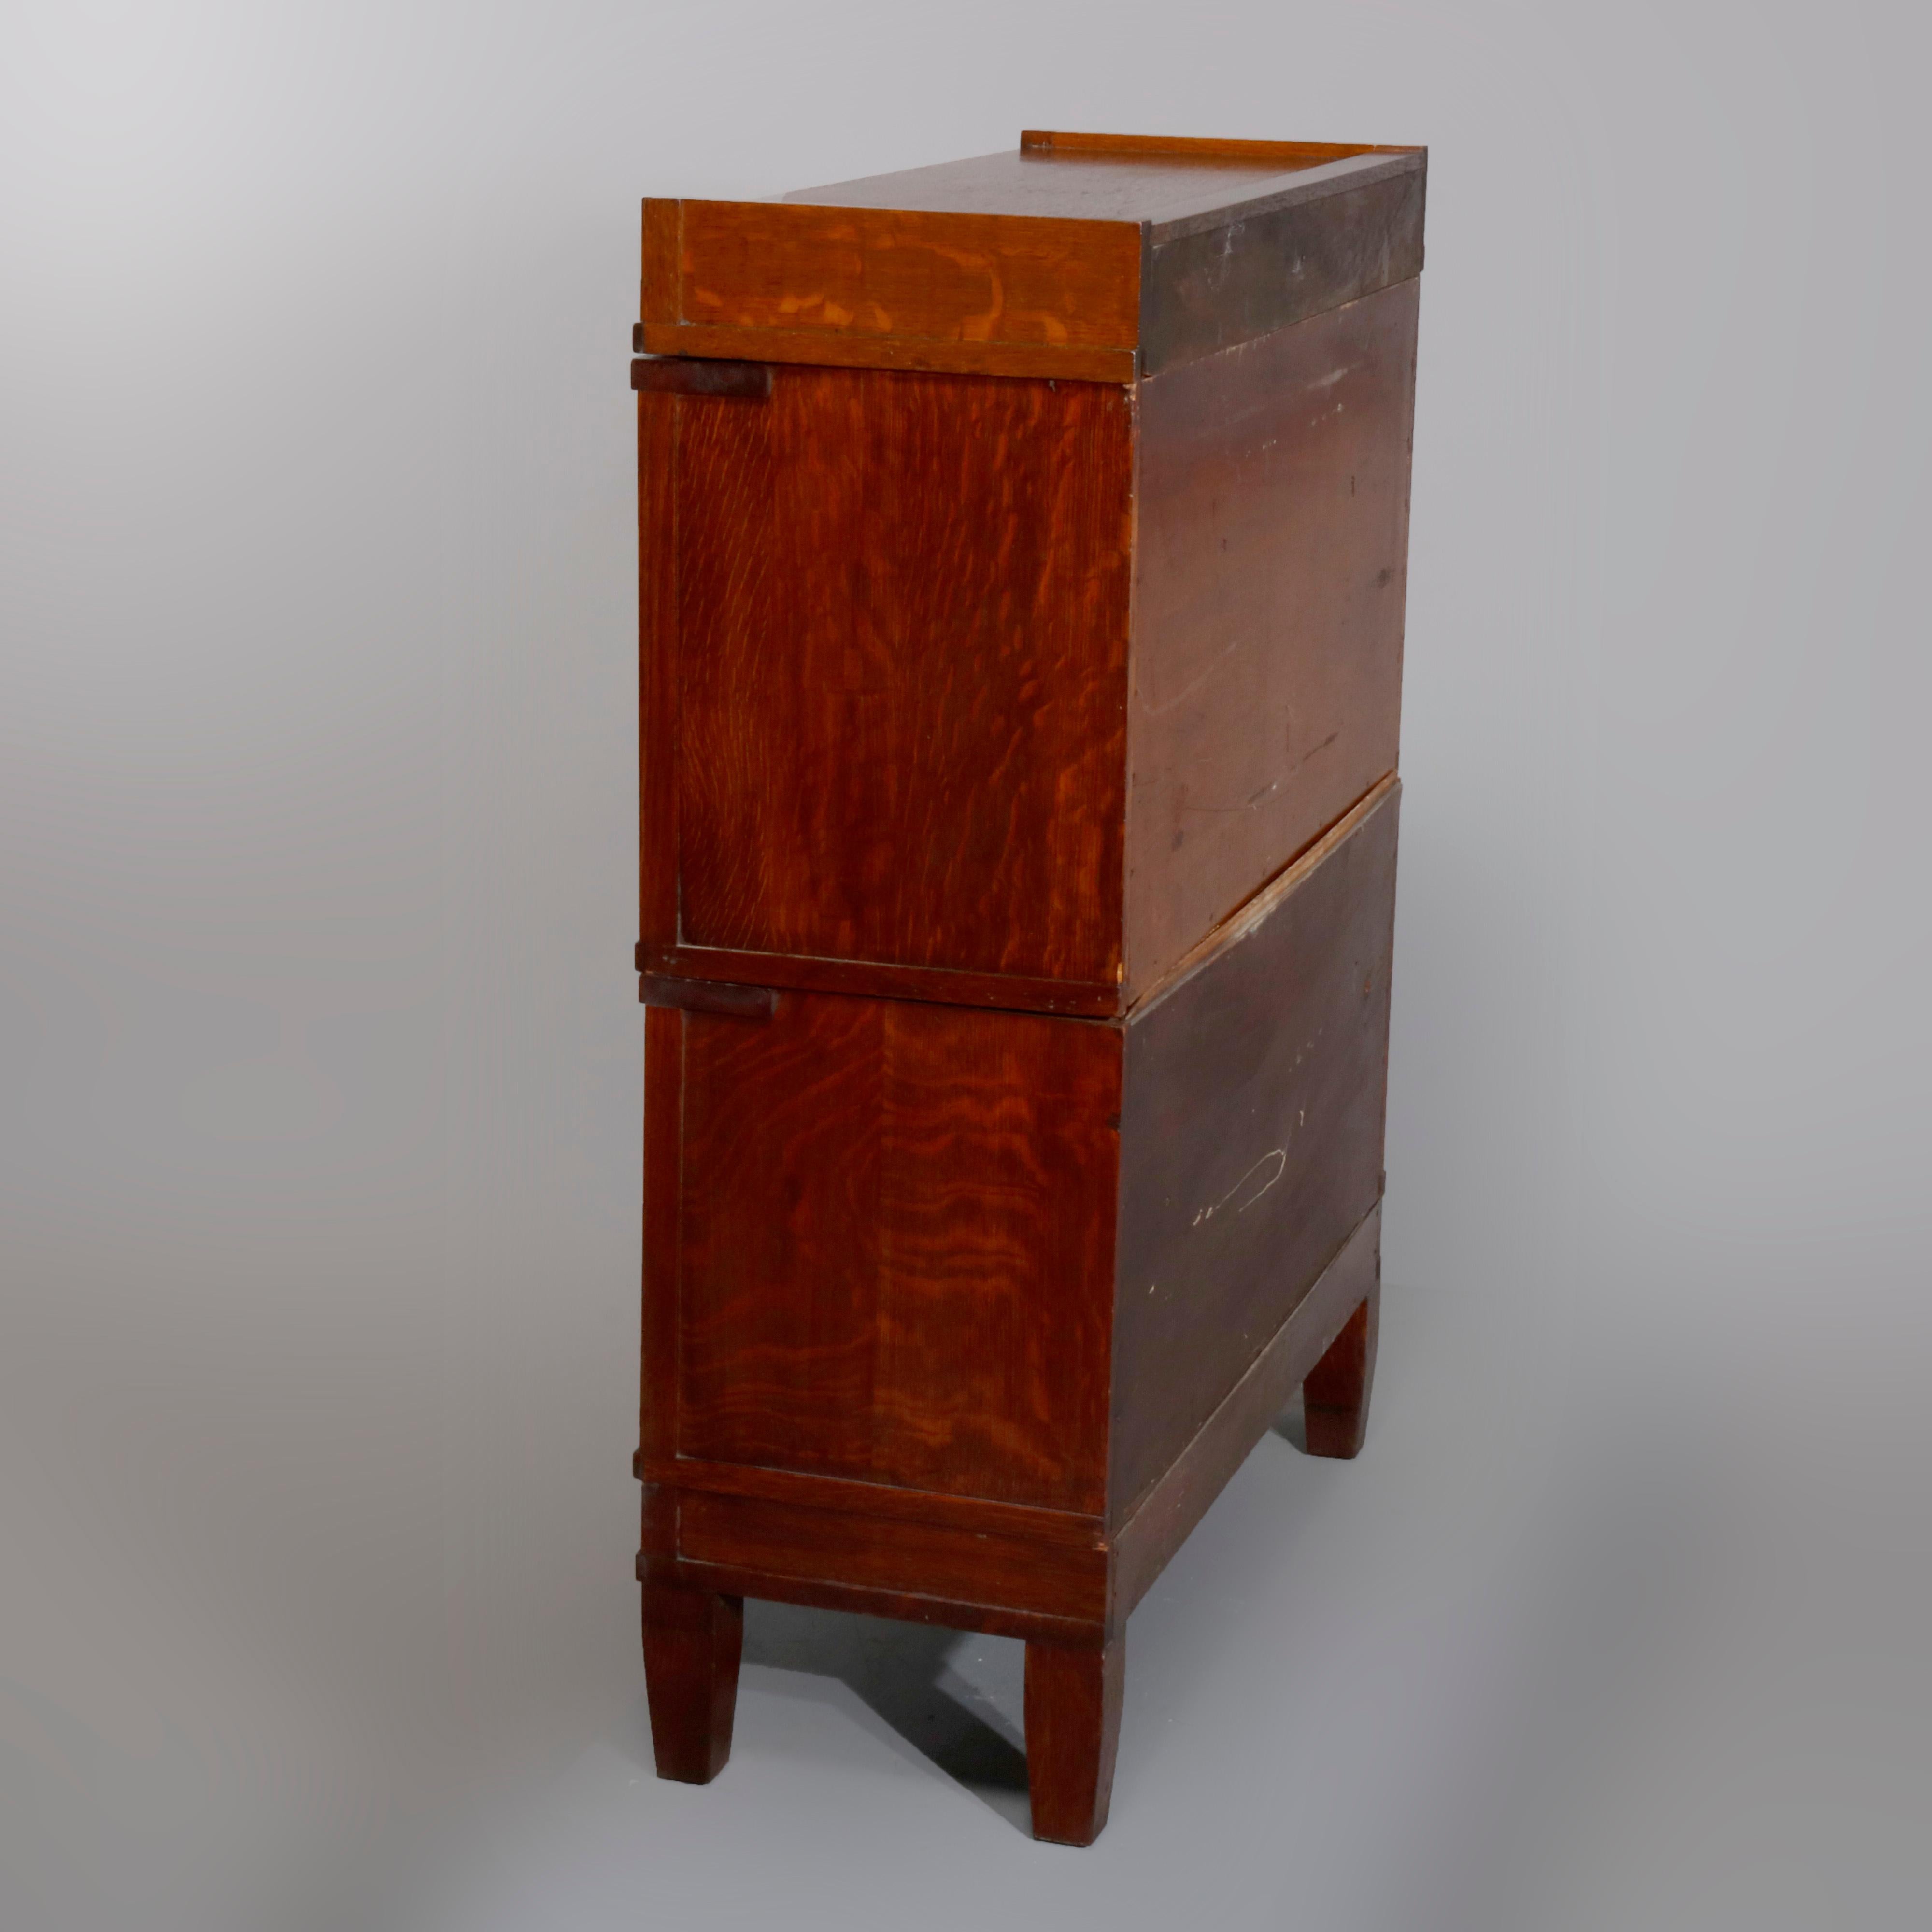 An antique Arts & Crafts mission oak barrister bookcase in the manner of Globe Wernicke offers quarter sawn oak construction with two stacks, each having pull-out glass doors and raised on tapered square legs, circa 1910.

Measures: 44.75